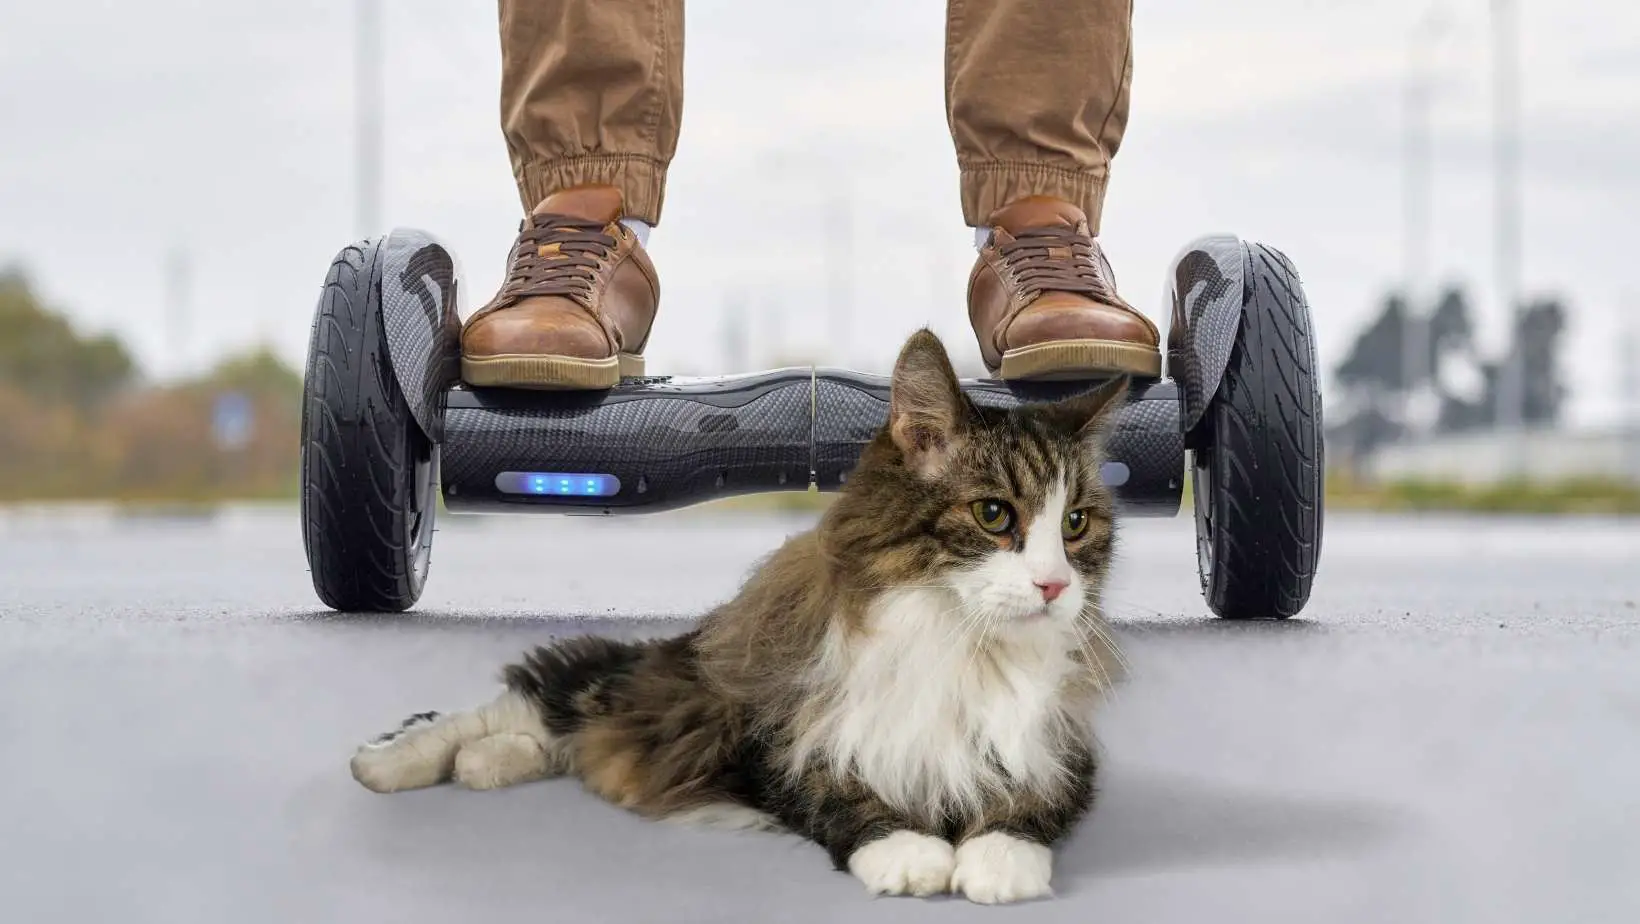 How to Get Cat Hoverboard?